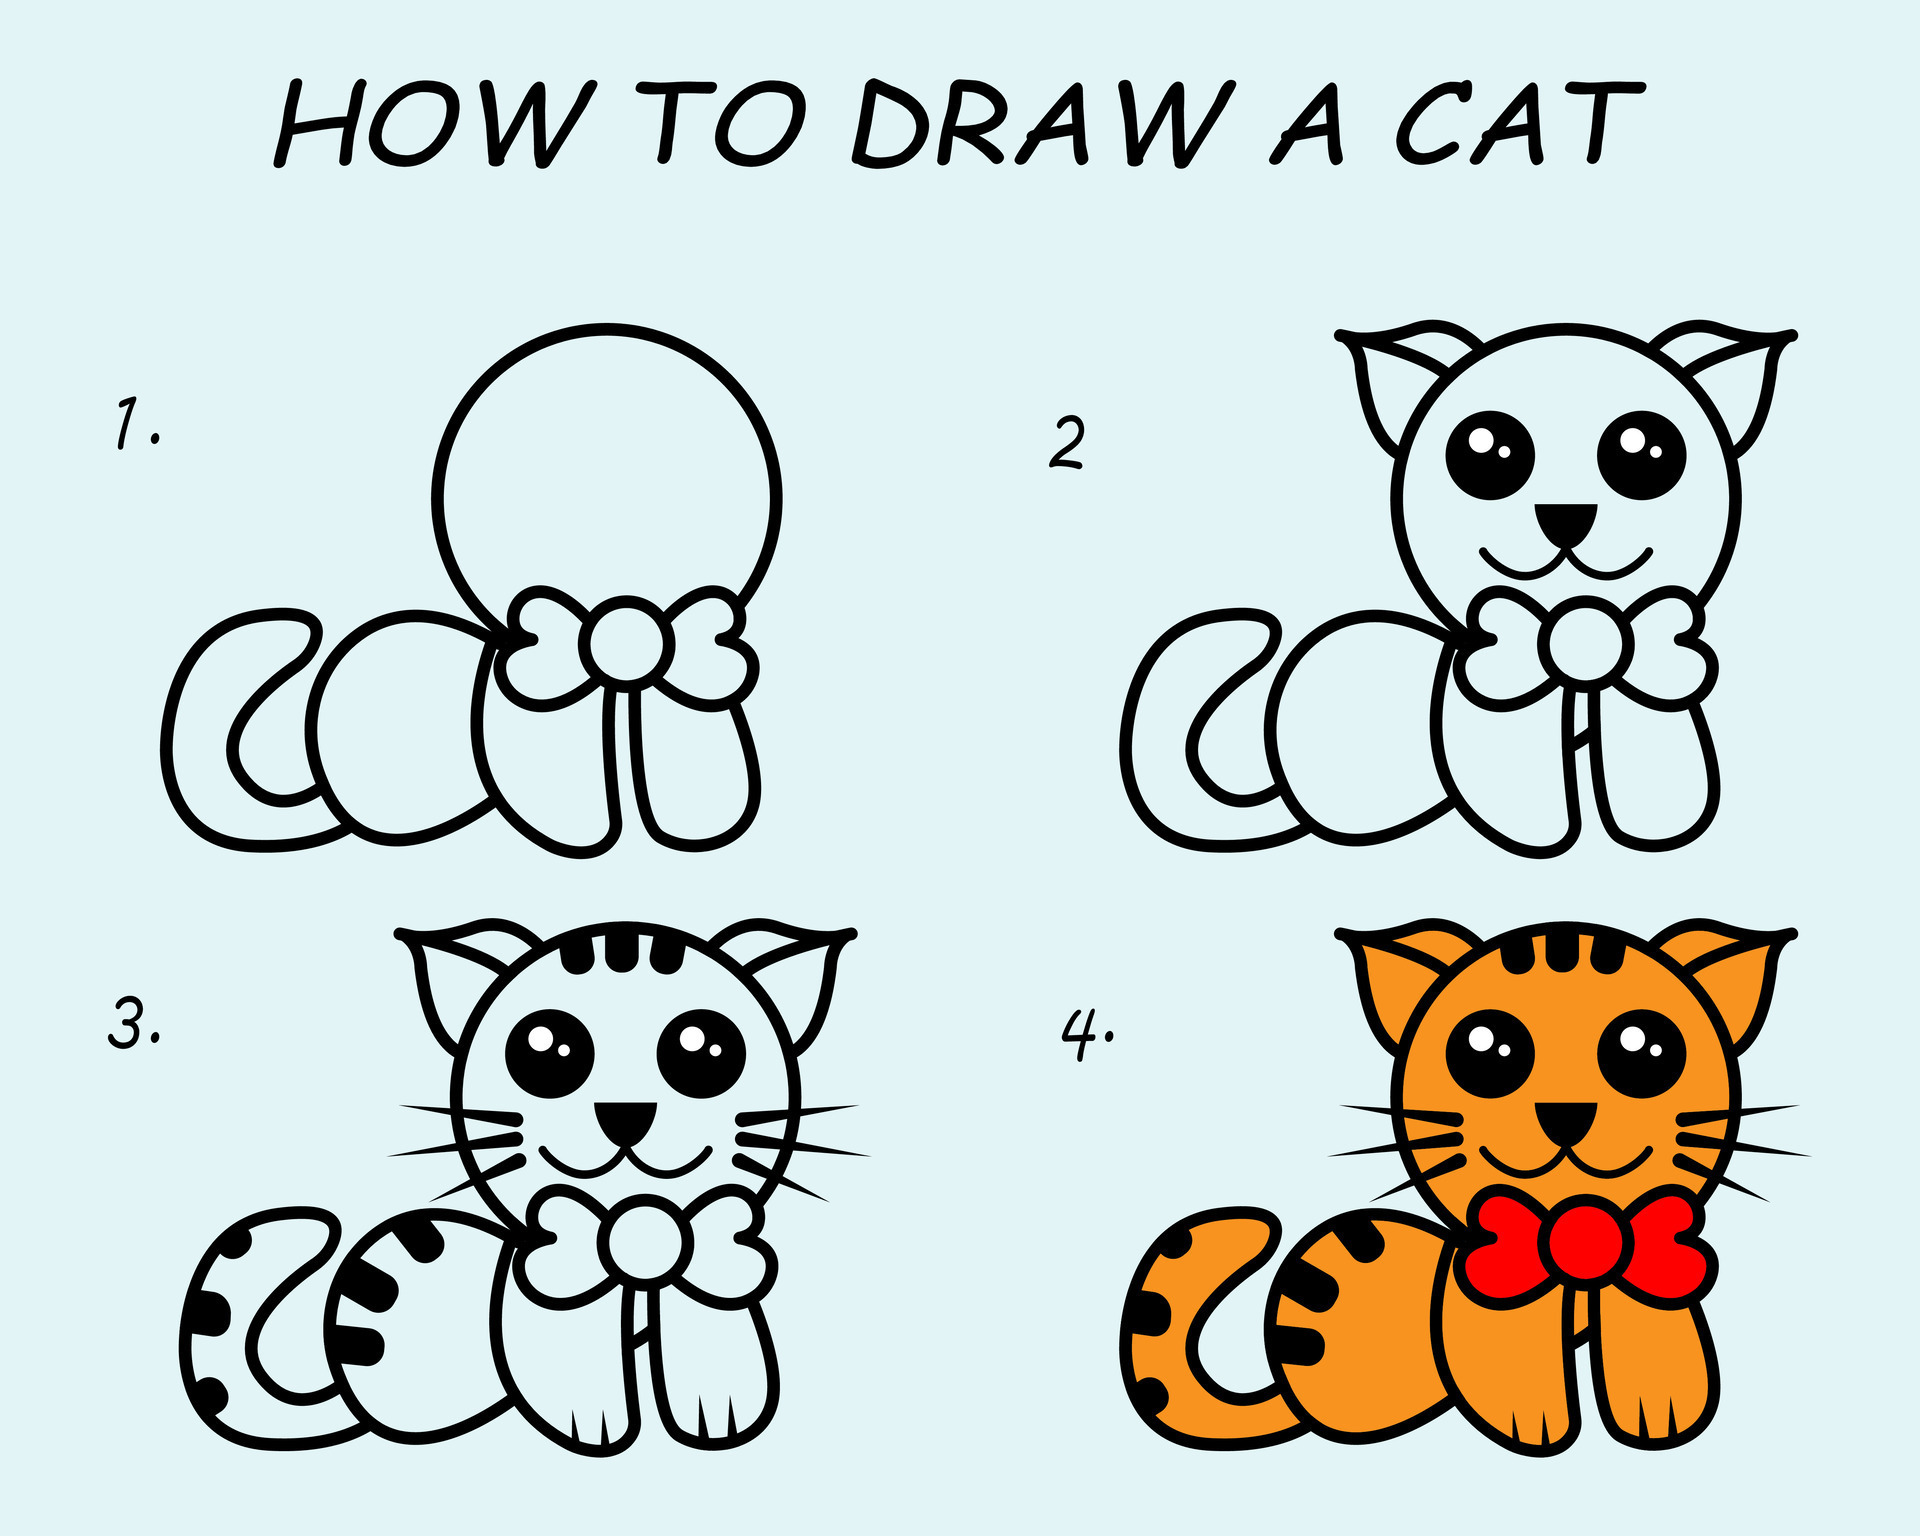 How to Draw a Cat's Face - Realistic Portrait - Step by Step Drawing  Tutorial - How to Draw Step by Step Drawing Tutorials